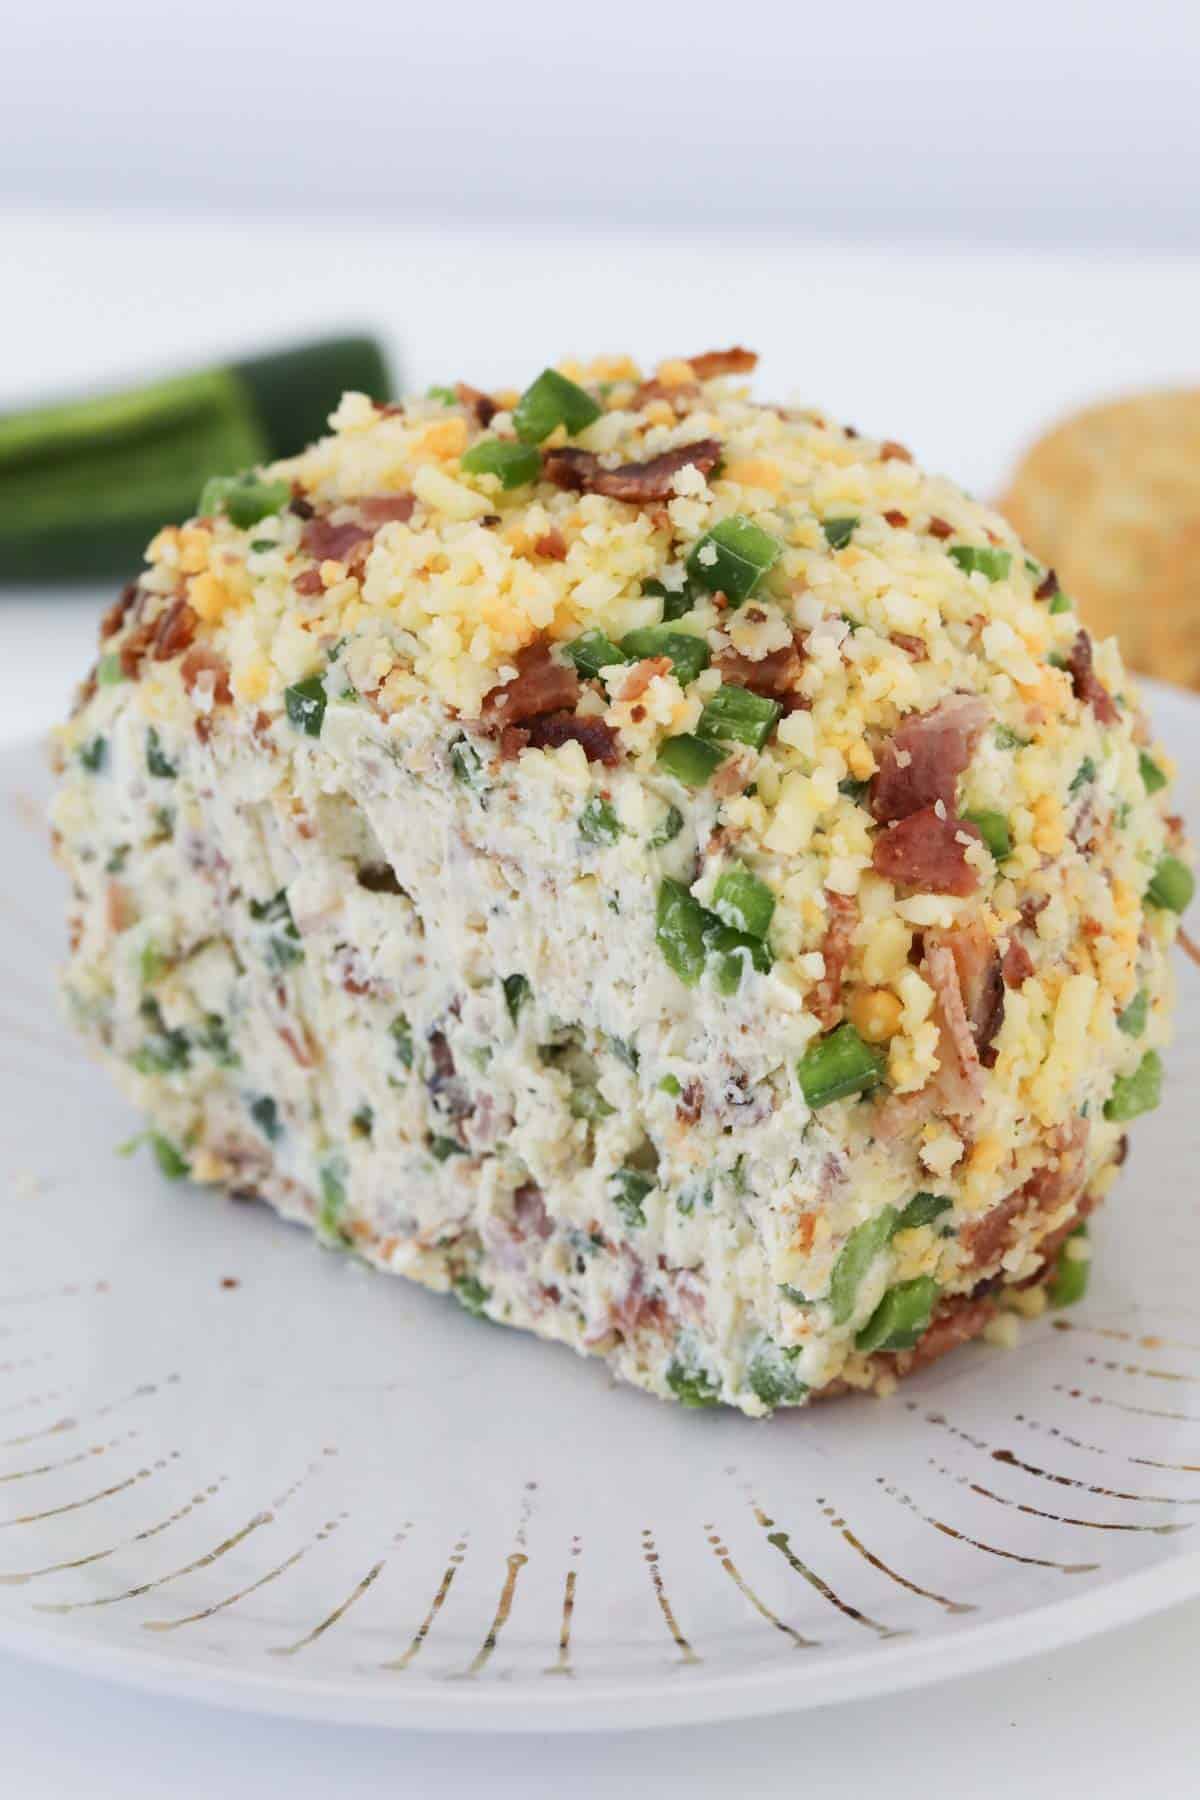 The jalapeño popper cheese ball on a plate with a slice cut out to show the texture.